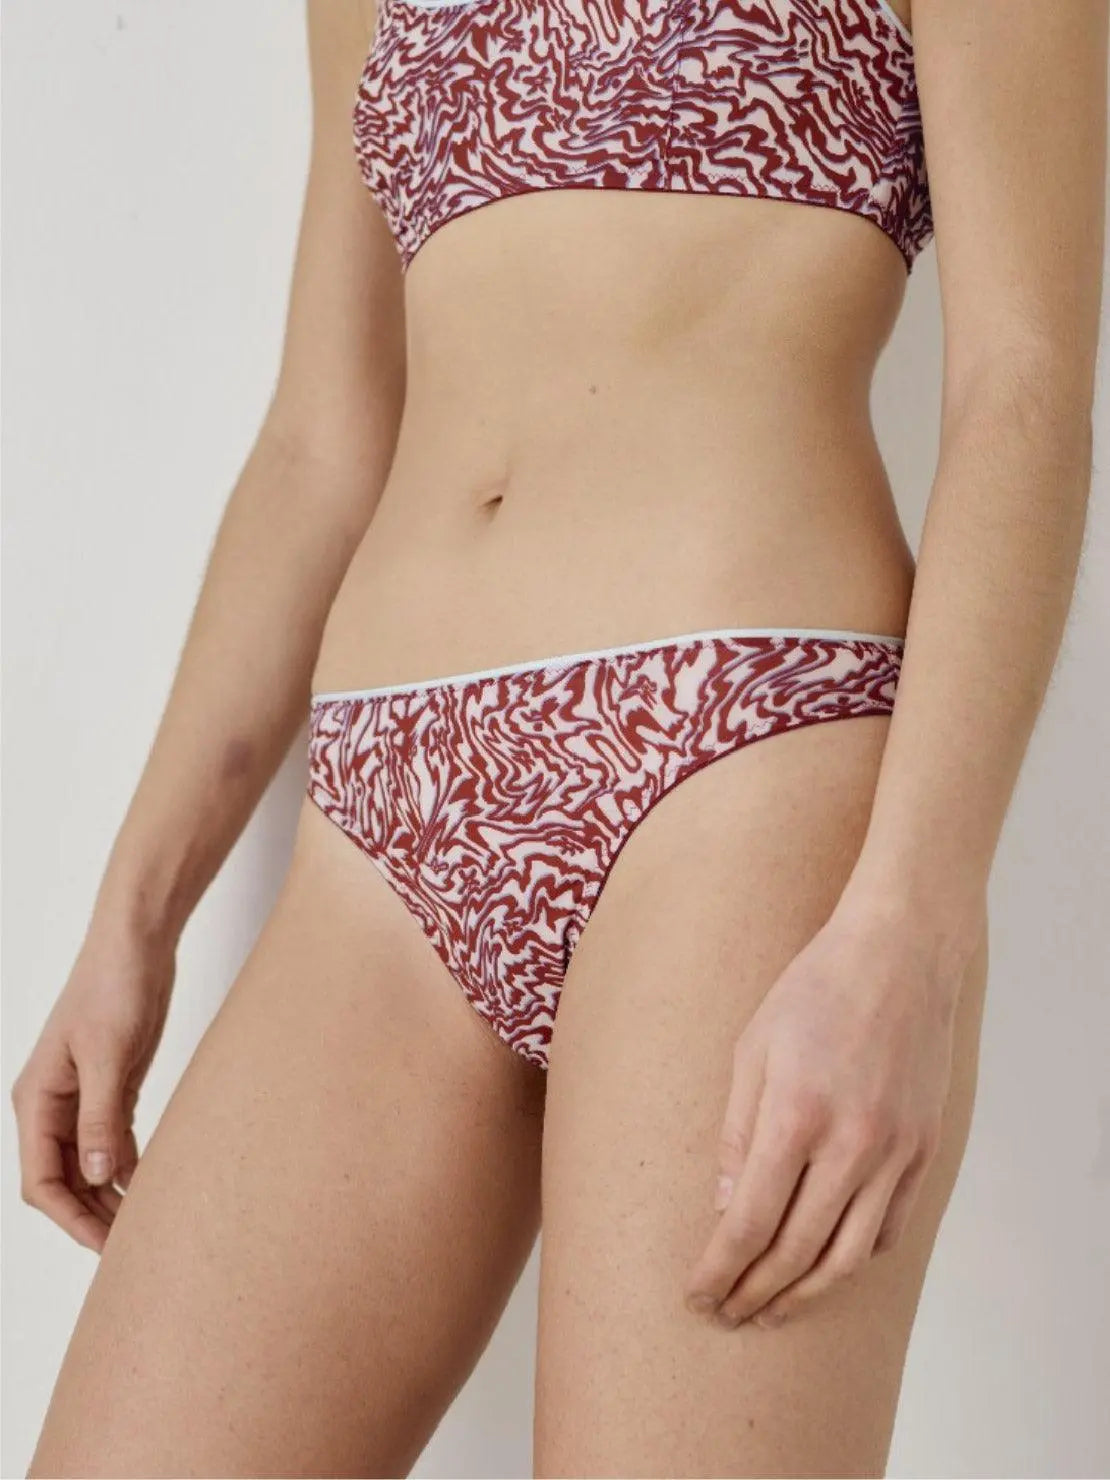 A person is wearing a matching set of red and white patterned underwear from Interiors, consisting of a bralette and a pair of Brazilian Briefs. The image shows the person's torso and part of their upper thighs. The background is plain and uncluttered.